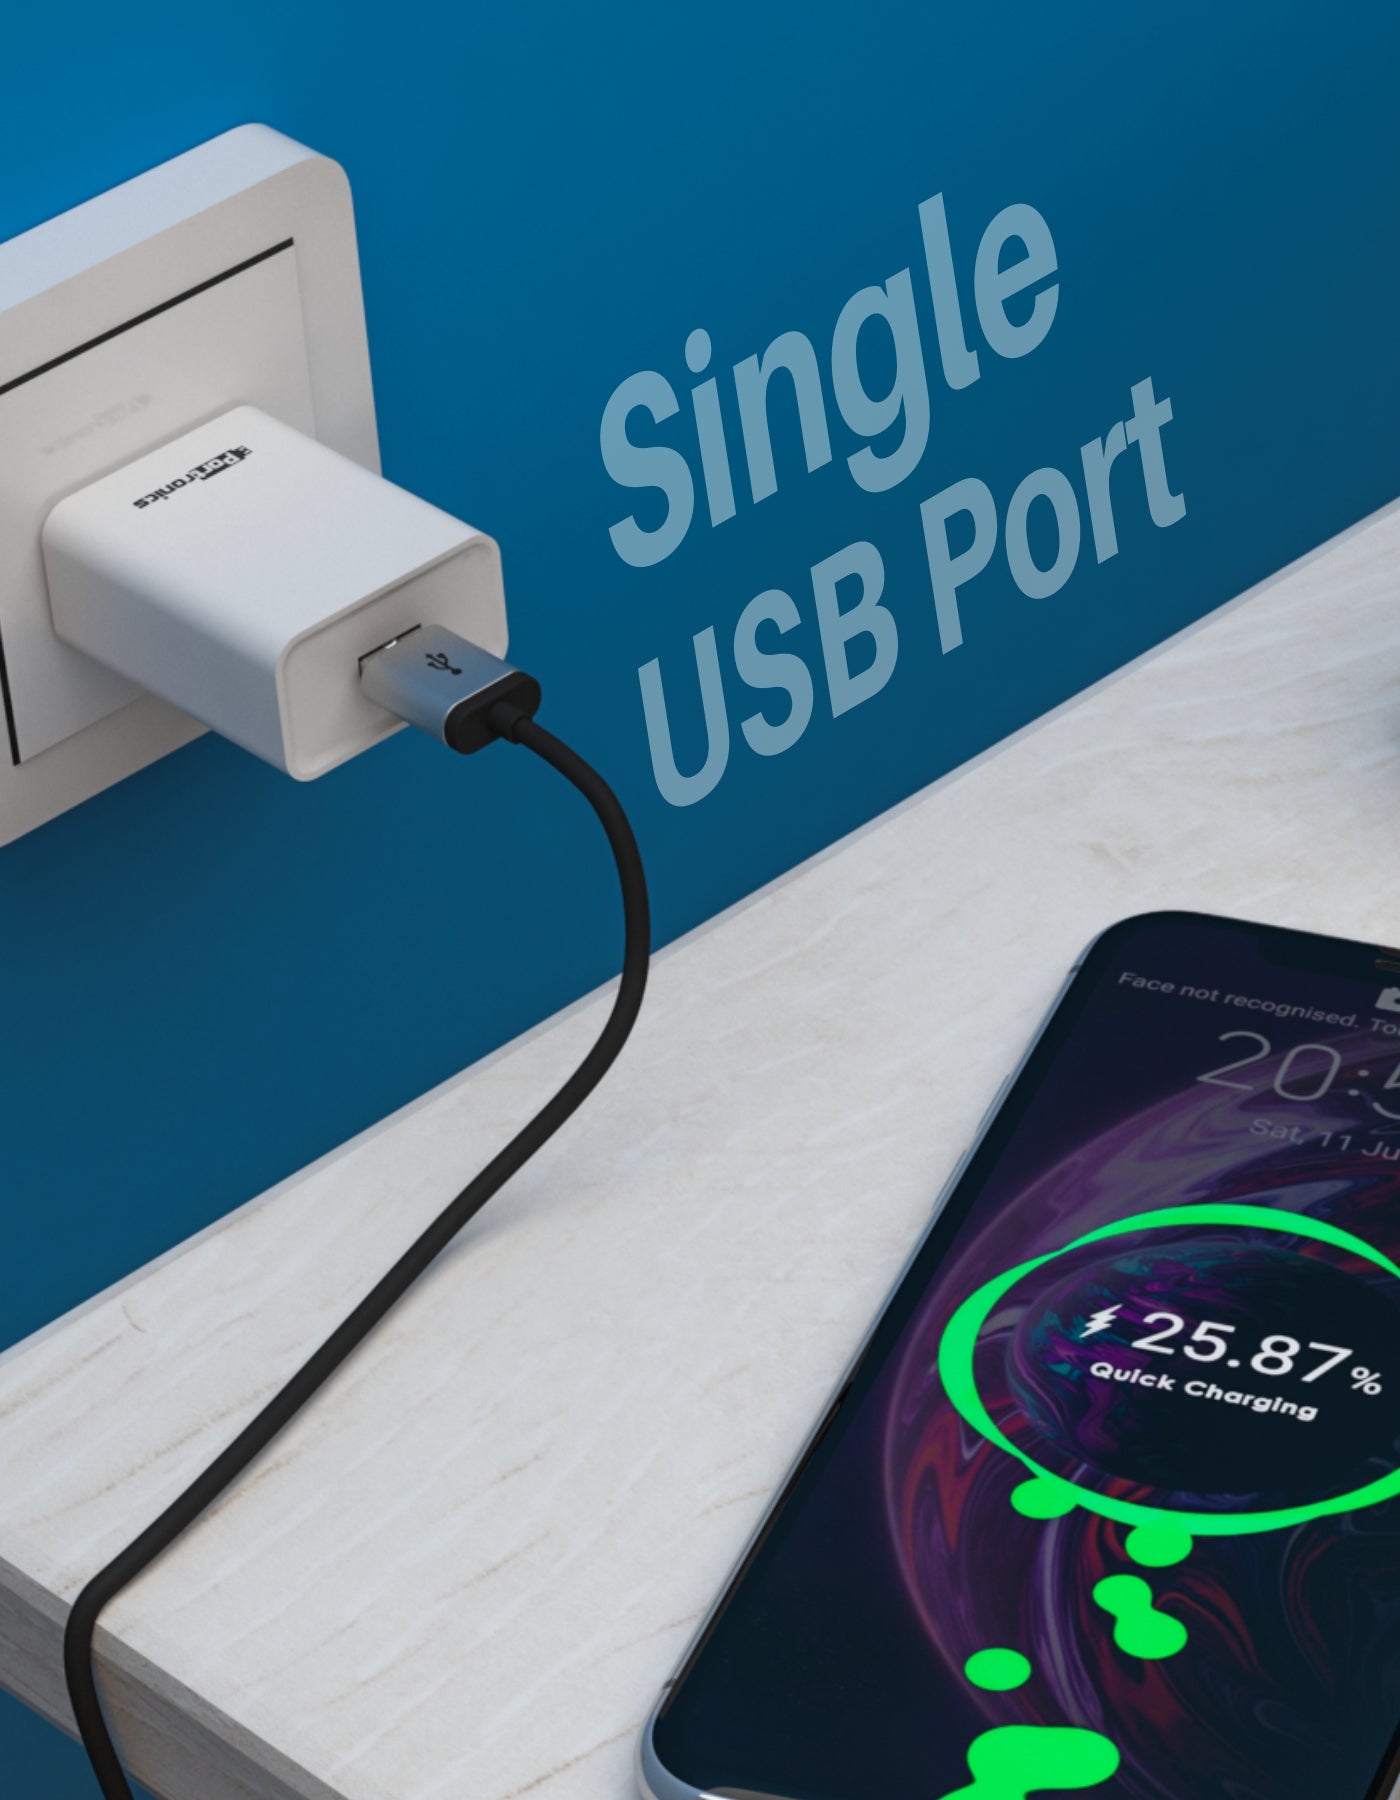 Portronics Adapto 62 USB Fast Charger connect with phone